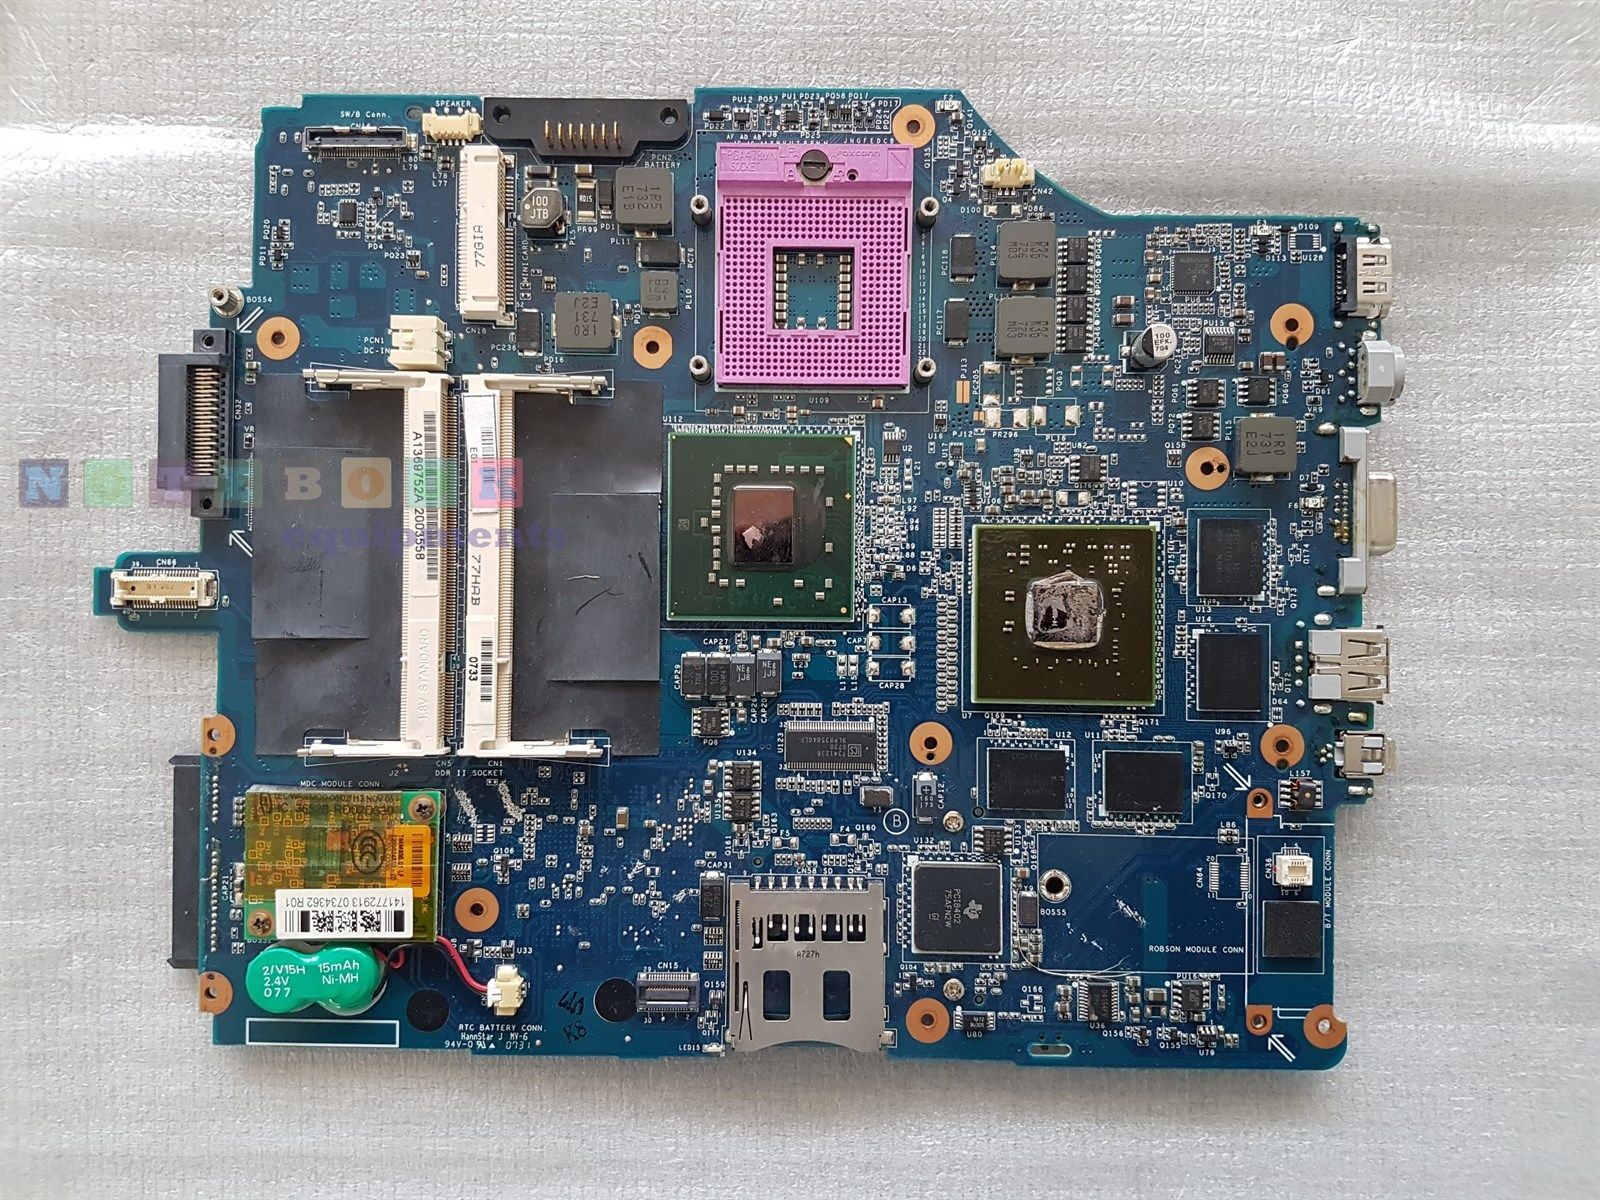 Sony motherboard MBX-165 MS91 VGN-FZ series 1P-0076500-8010 Intel motherboard